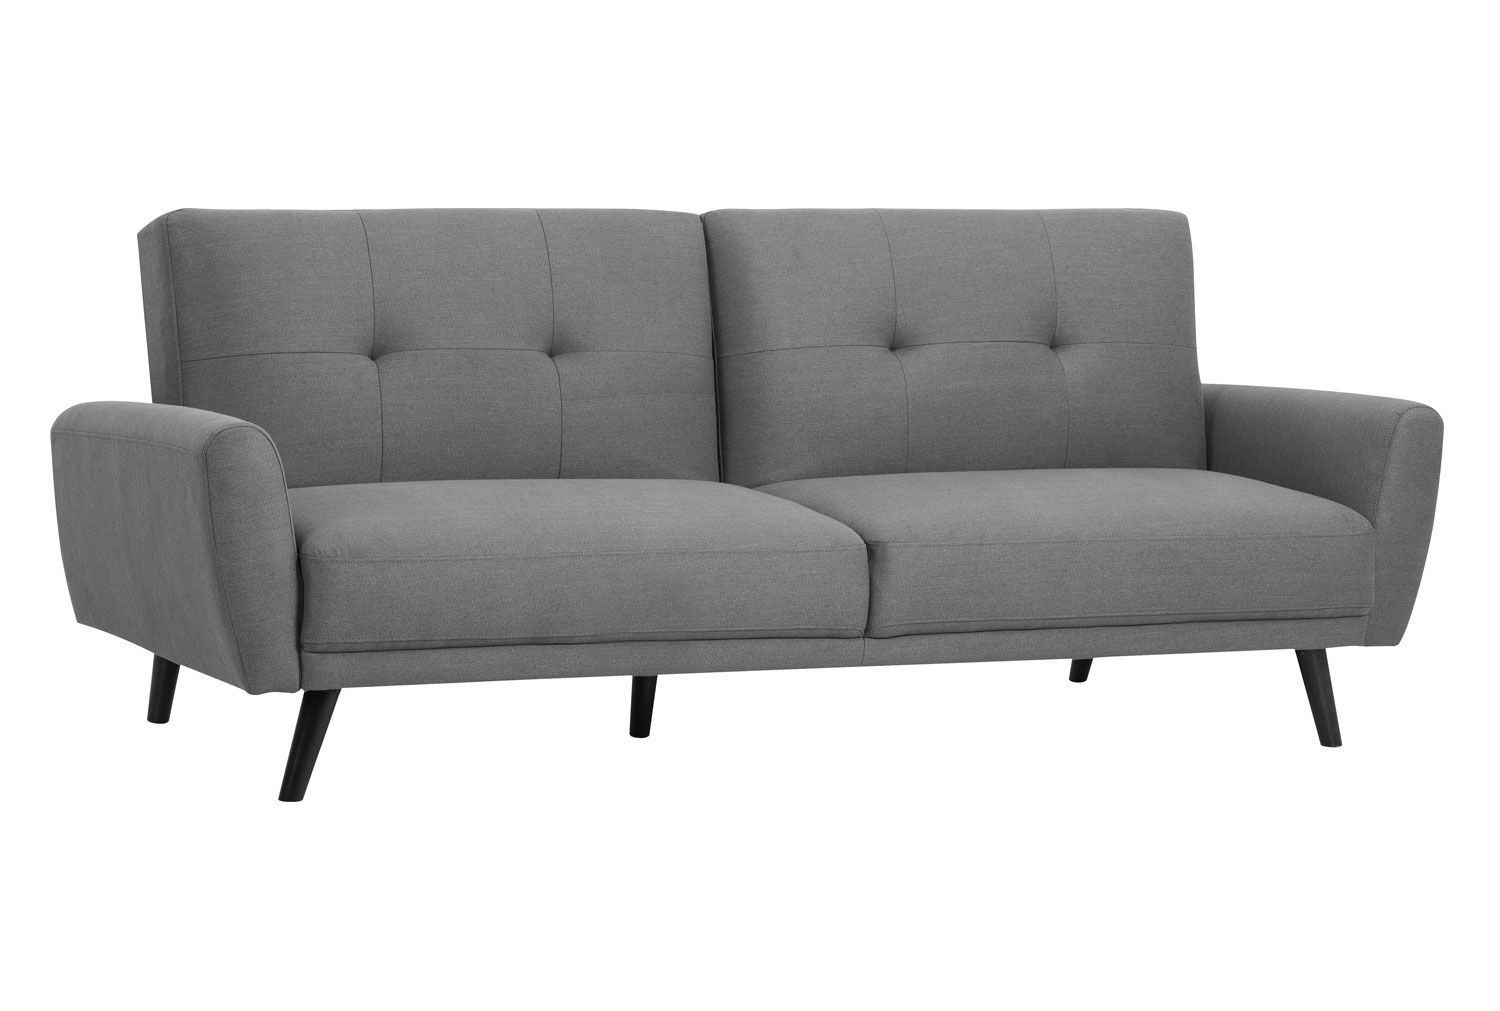 Connelly Fabric Sofa Bed (Grey Linen)